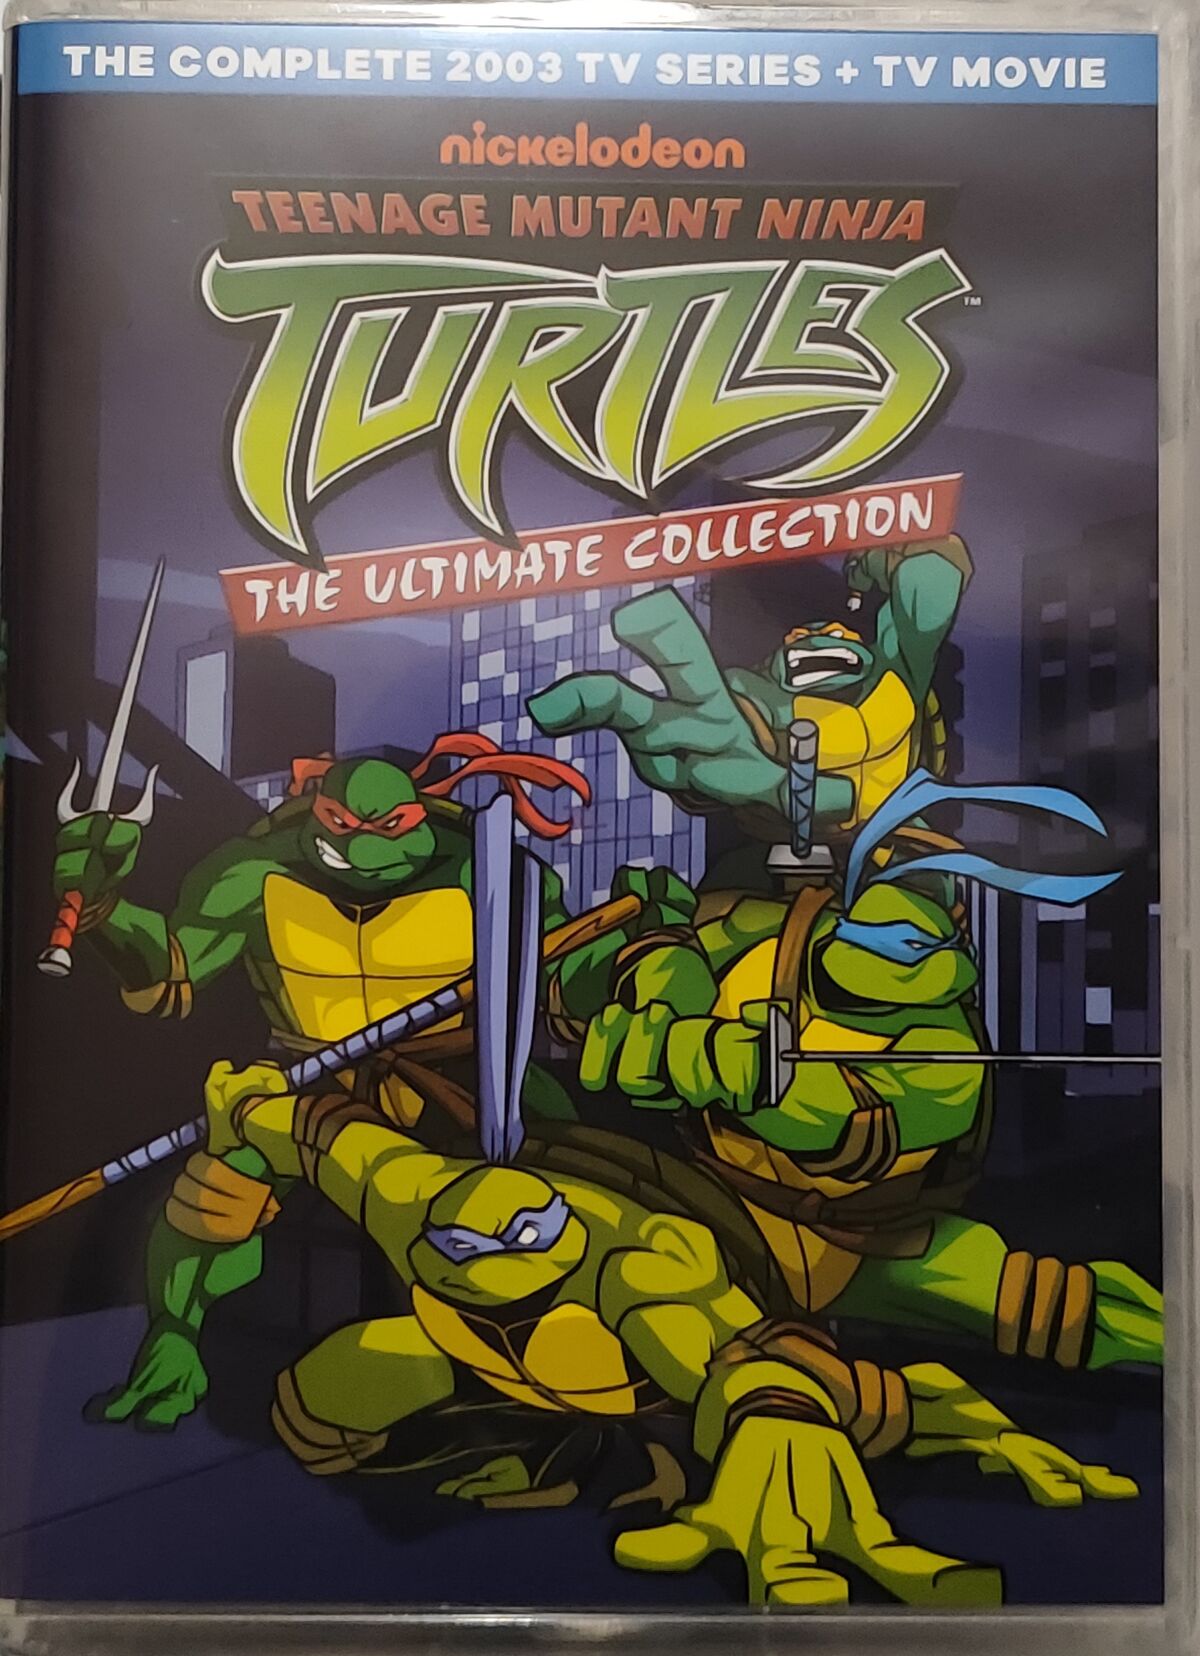 https://static.wikia.nocookie.net/tmnt/images/8/8e/TMNT_2003_The_Ultimate_Collection.jpg/revision/latest/scale-to-width-down/1200?cb=20231119042314&path-prefix=de